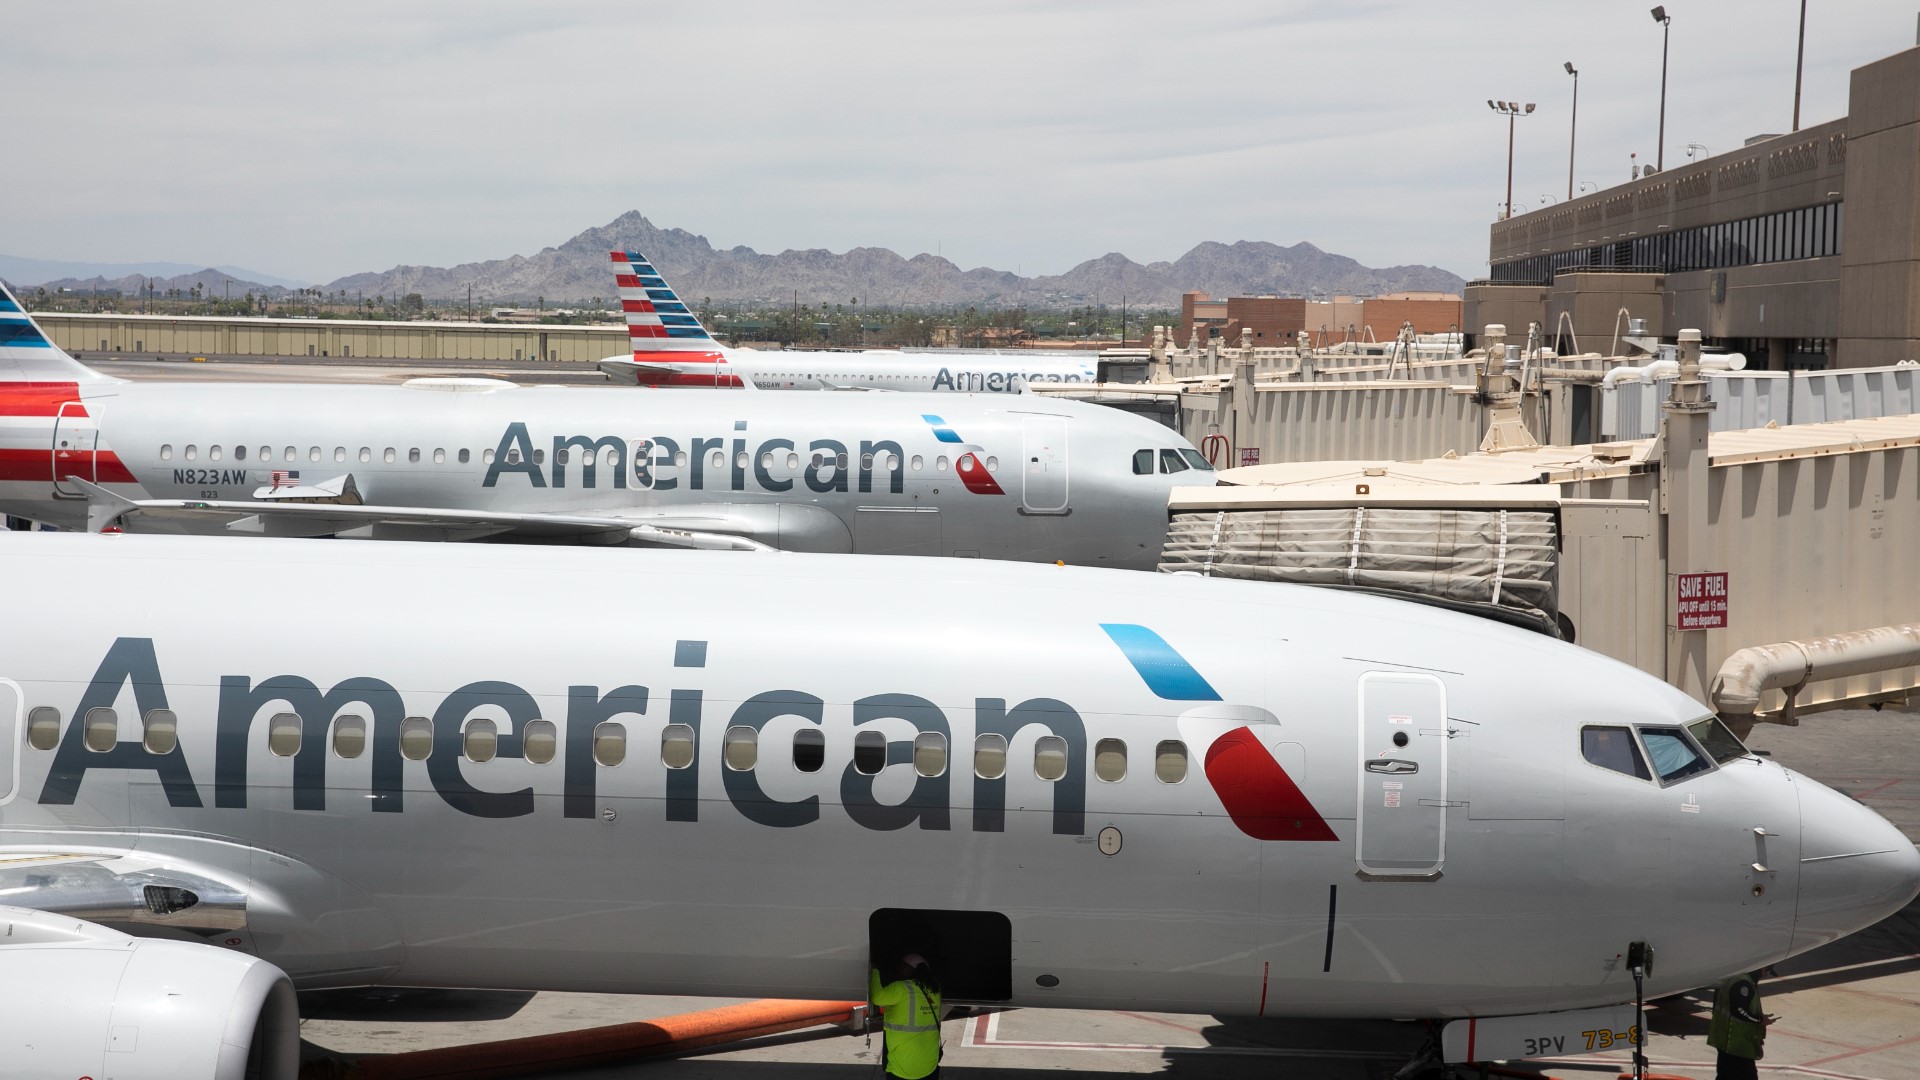 American Airlines will join Delta in offering nonstop flights to New York's LaGuardia Airport (LGA) starting June 2.